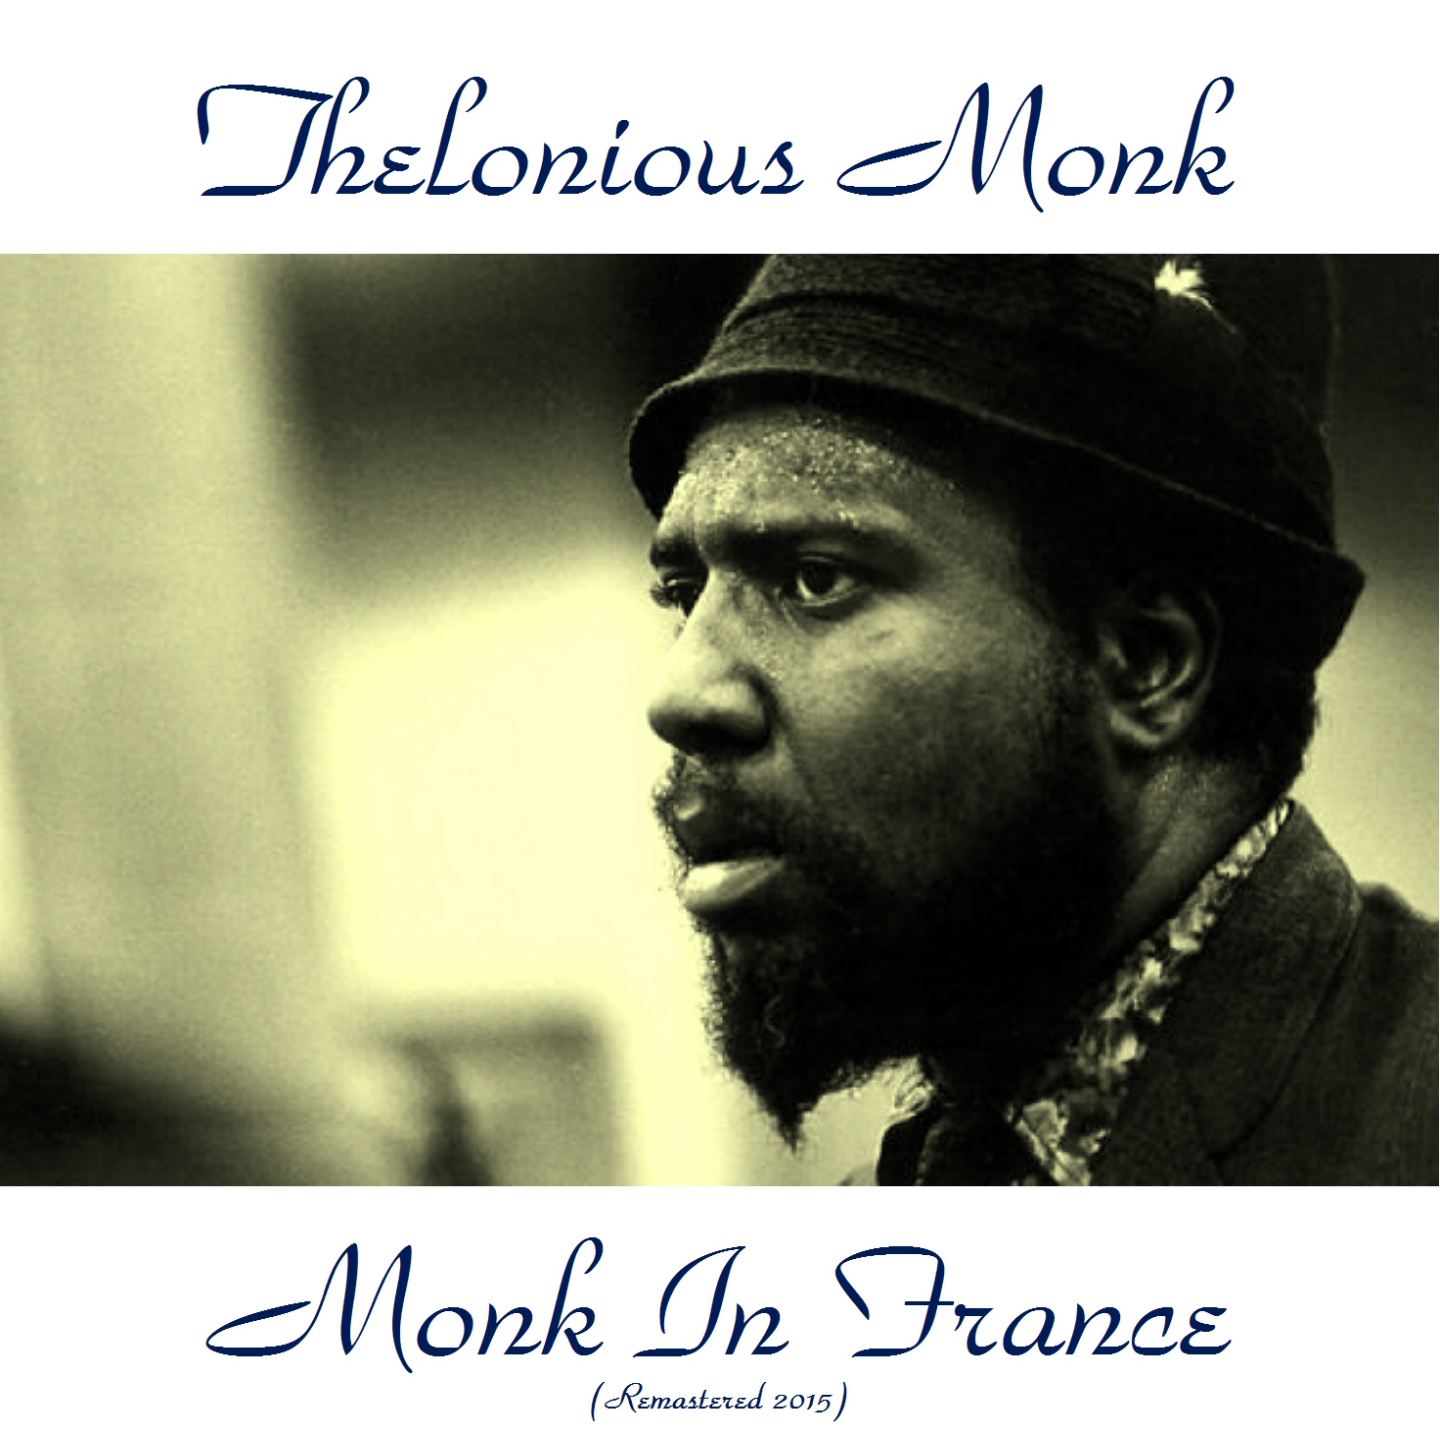 Monk in France (Remastered 2015)